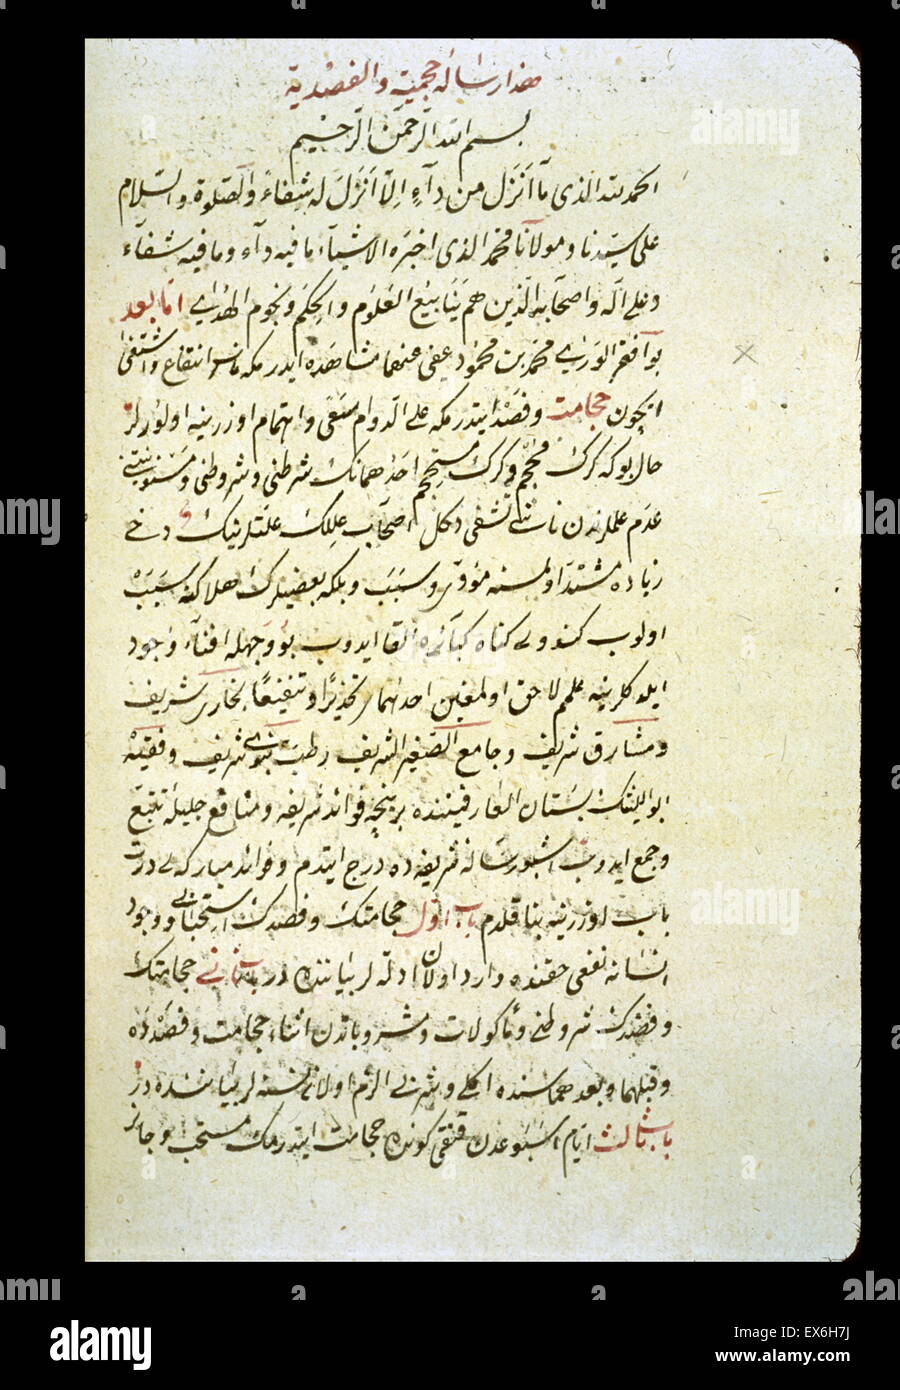 The opening of a Turkish treatise on cupping and bloodletting by an otherwise unknown author, Mu?ammad ibn Ma?m?d, who states at the end of the treatise that he completed writing it in the month of Rajab 1171 [= March-April 1758]. The copy was made in 177 Stock Photo